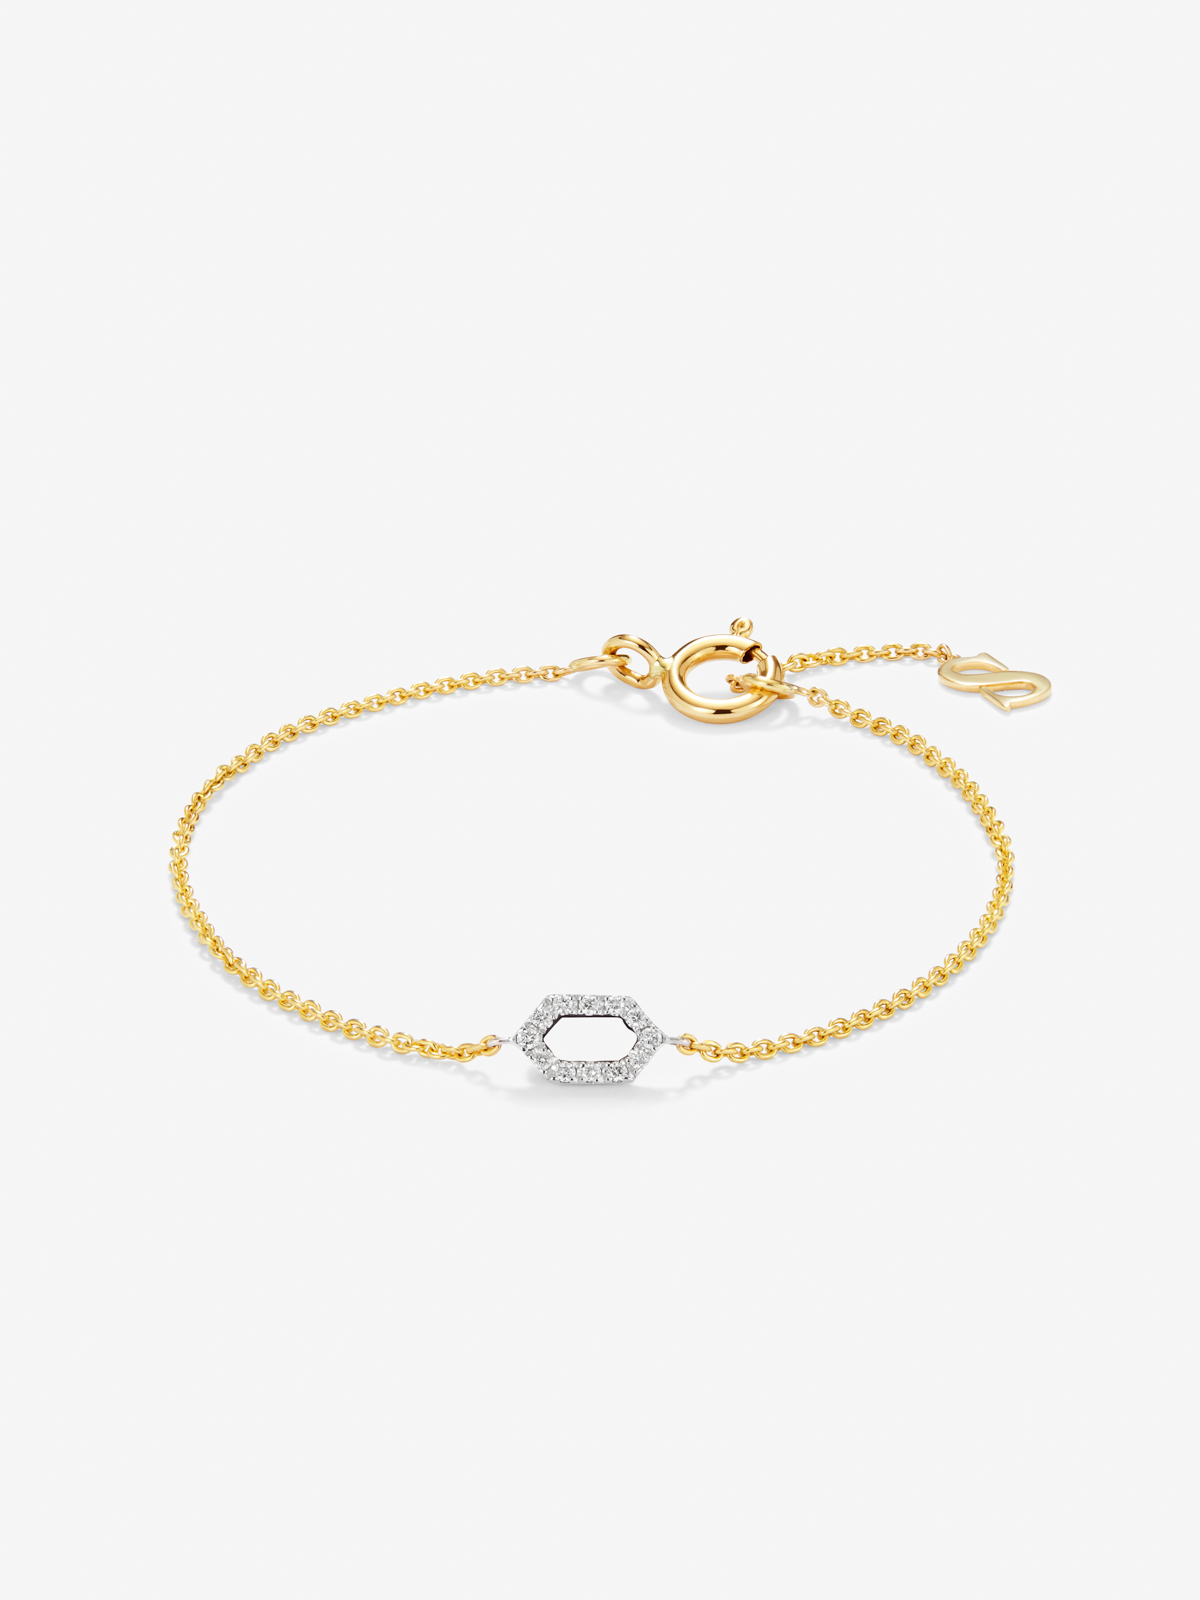 18K white and yellow gold bracelet with white 0.03 cts bright diamonds